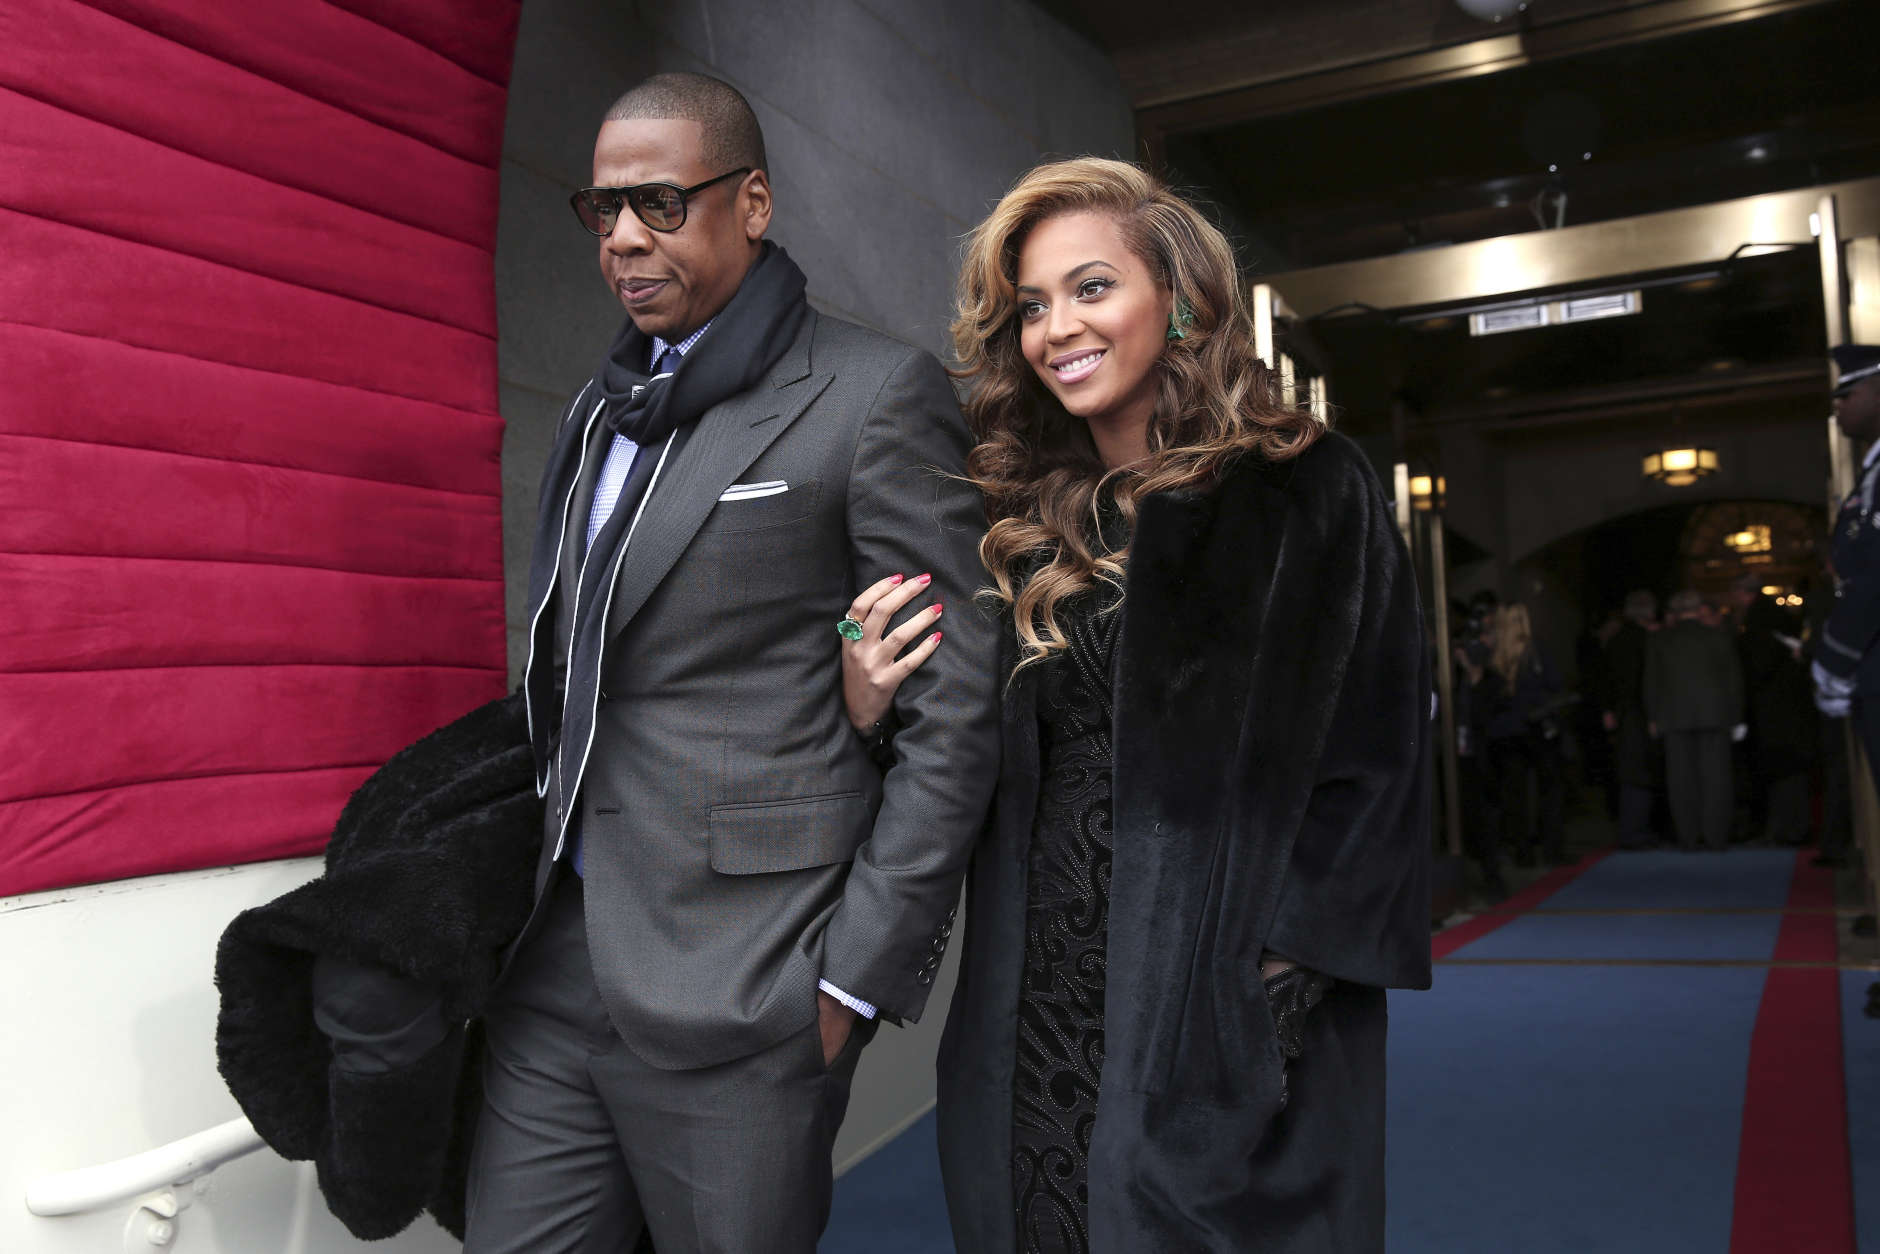 Recording artists Jay-Z and Beyonce arrive on the West Front of the Capitol in Washington, Monday, Jan. 21, 2013, for the Presidential Barack Obama's ceremonial swearing-in ceremony during the 57th Presidential Inauguration.  (AP Photo/Win McNamee, Pool)